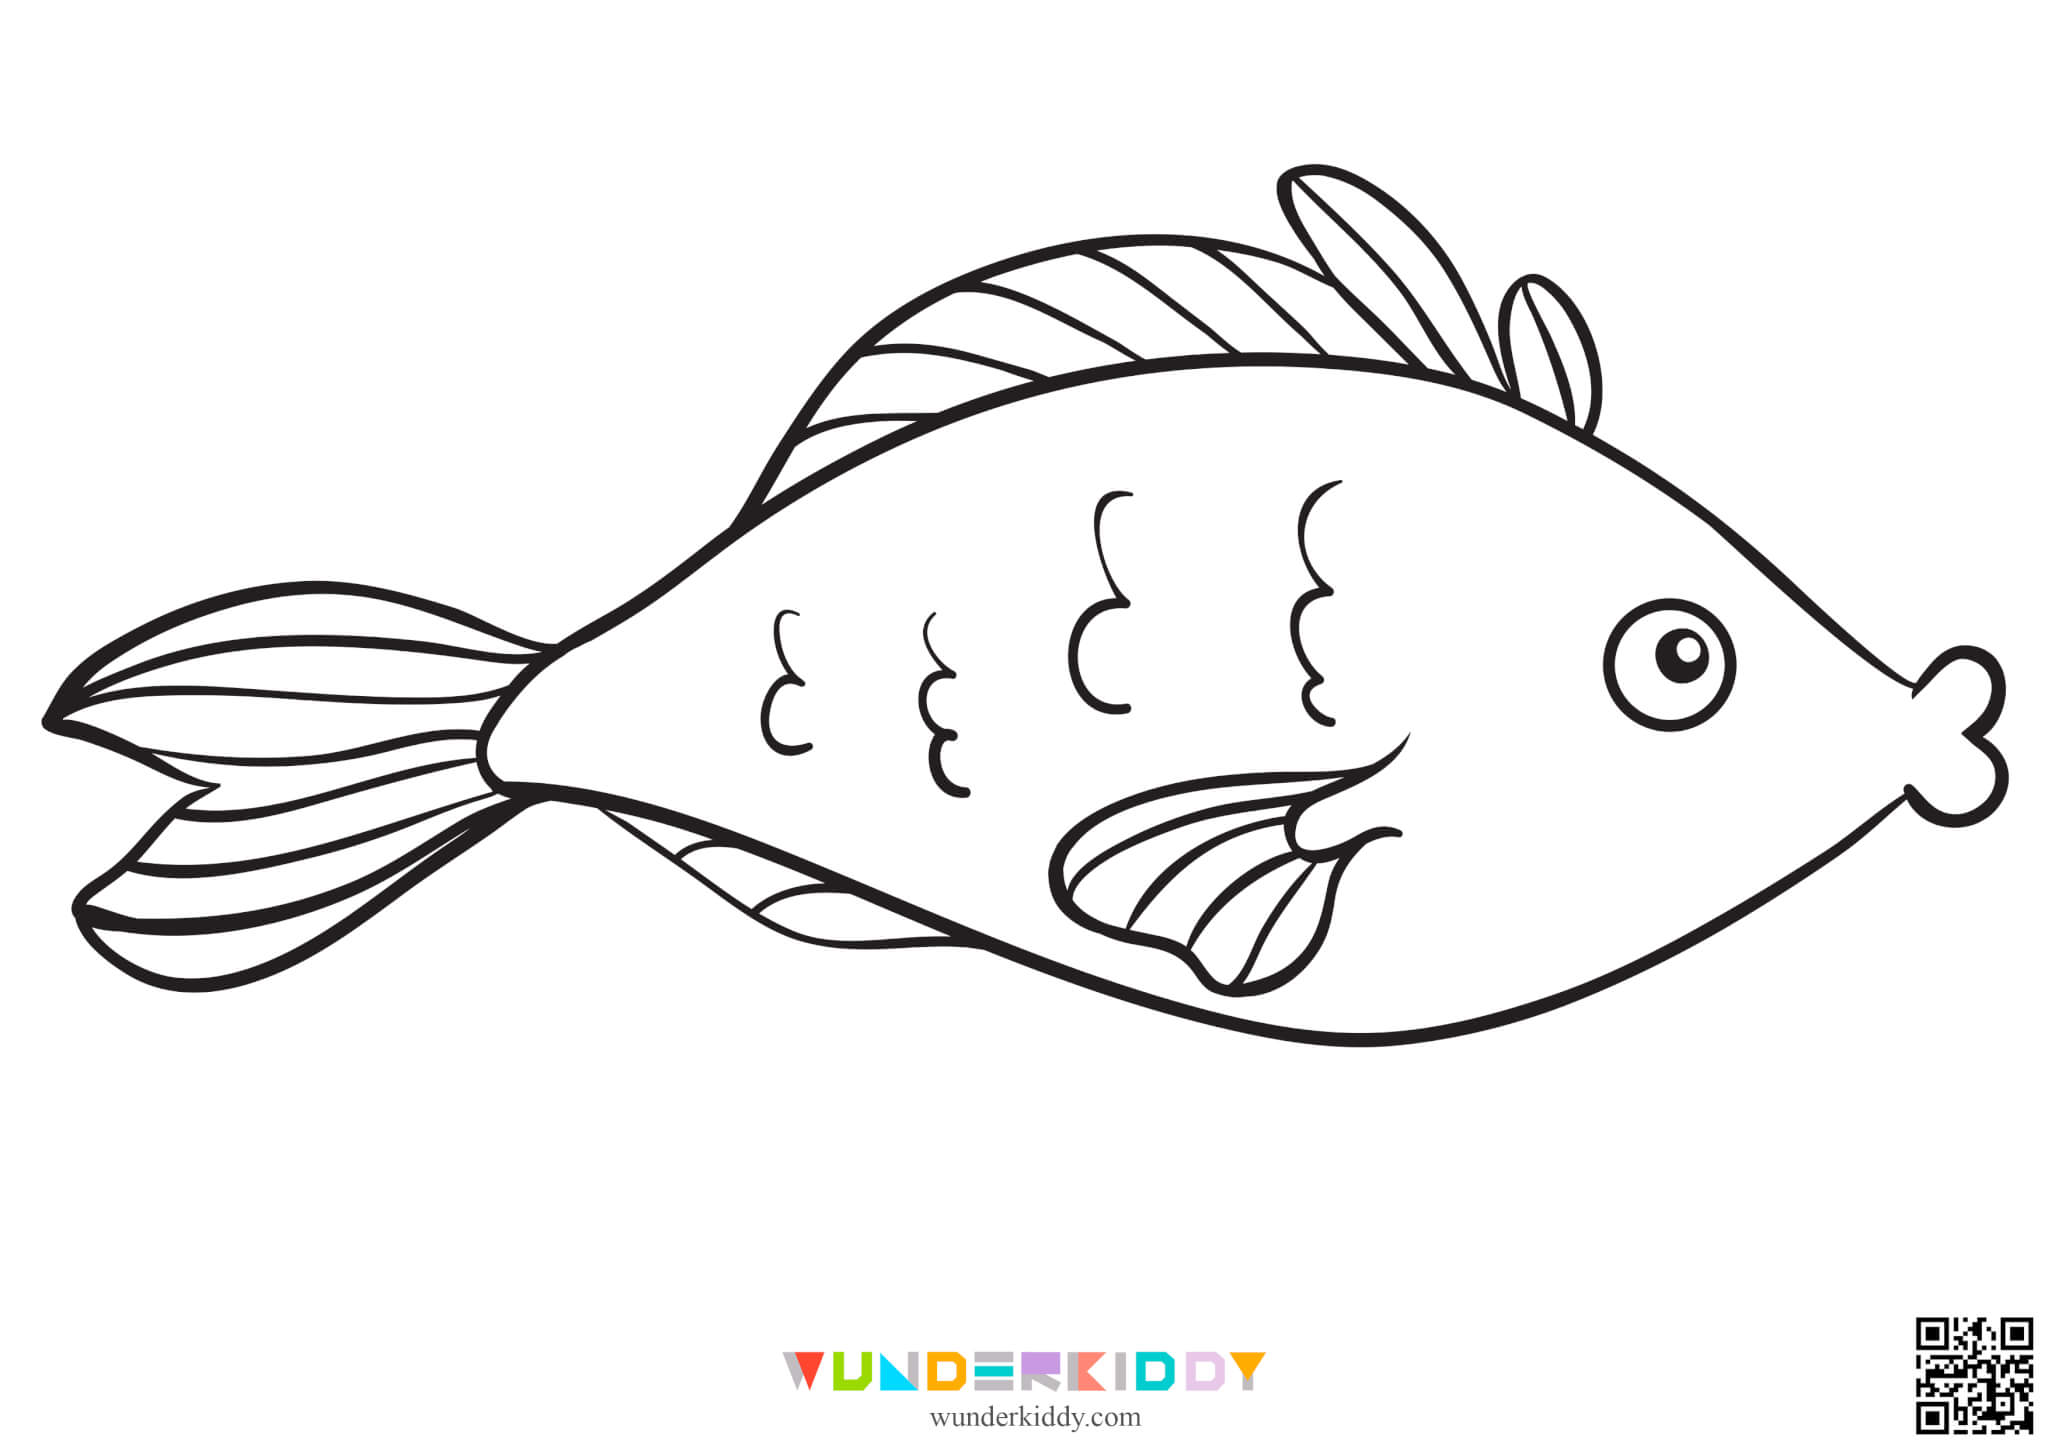 Fish Printable Coloring Pages - Image 18